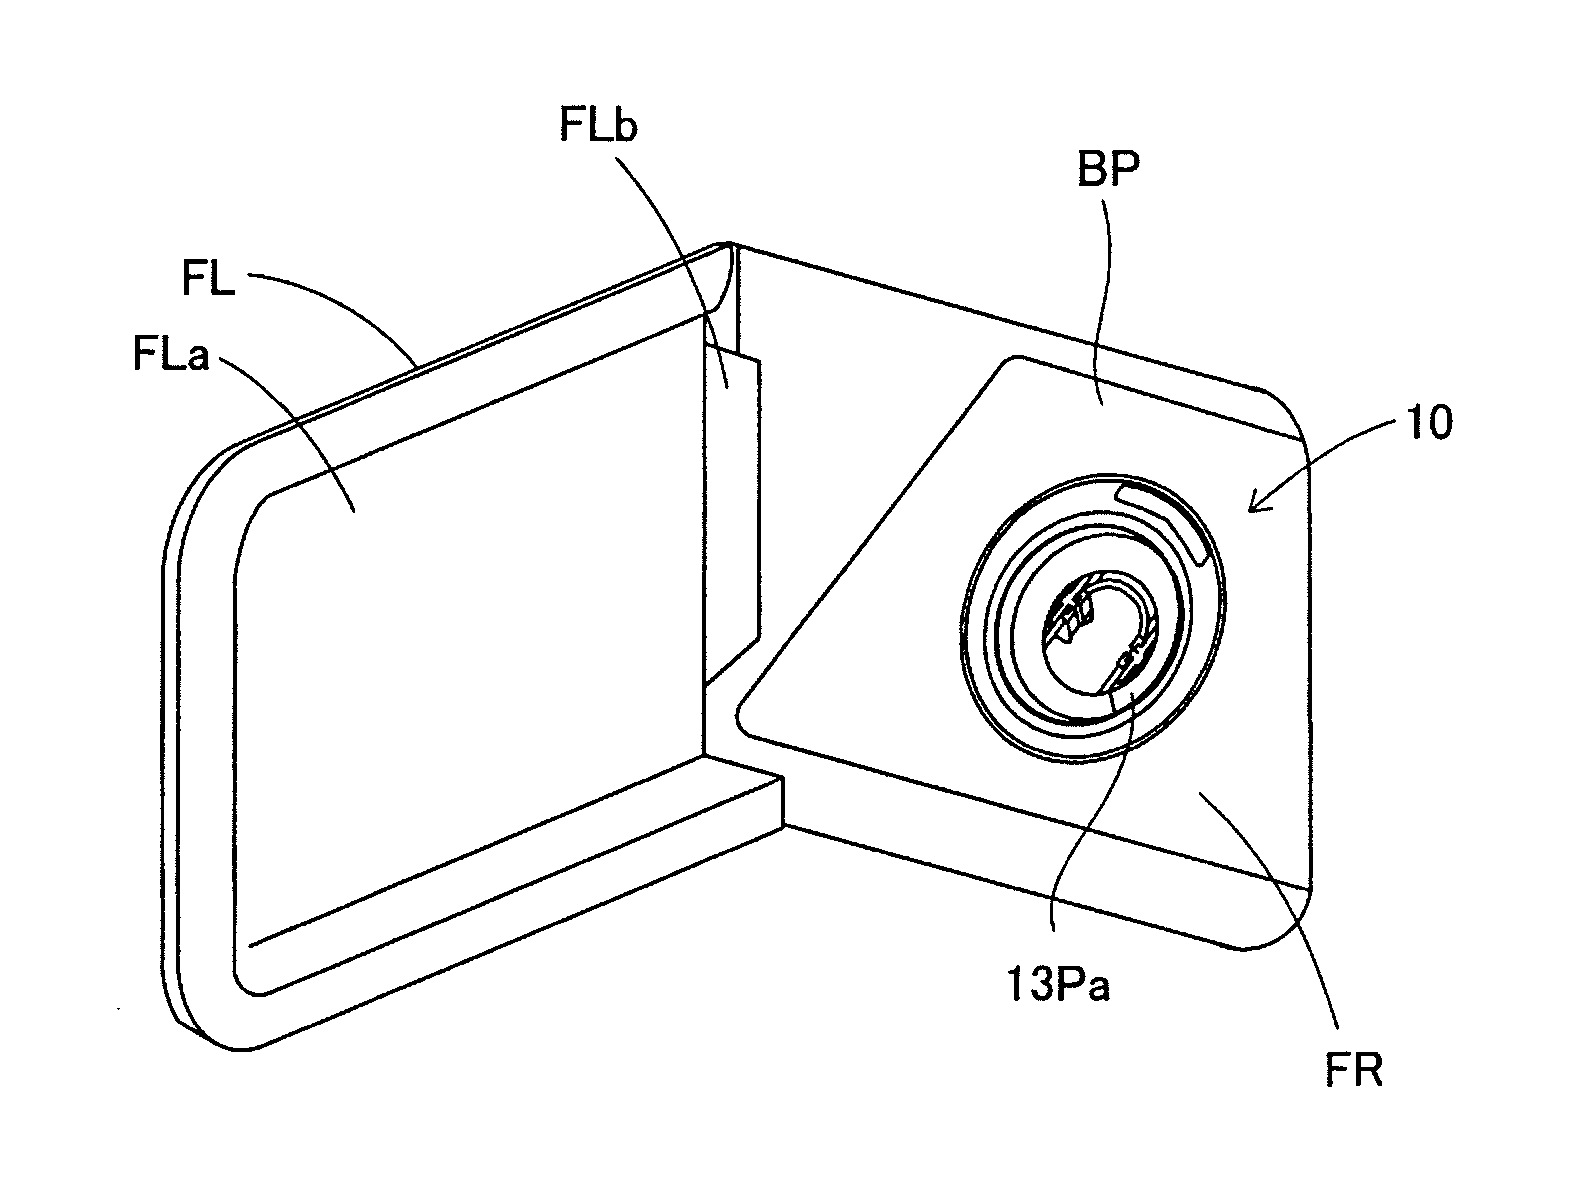 Fuel tank opening-closing device